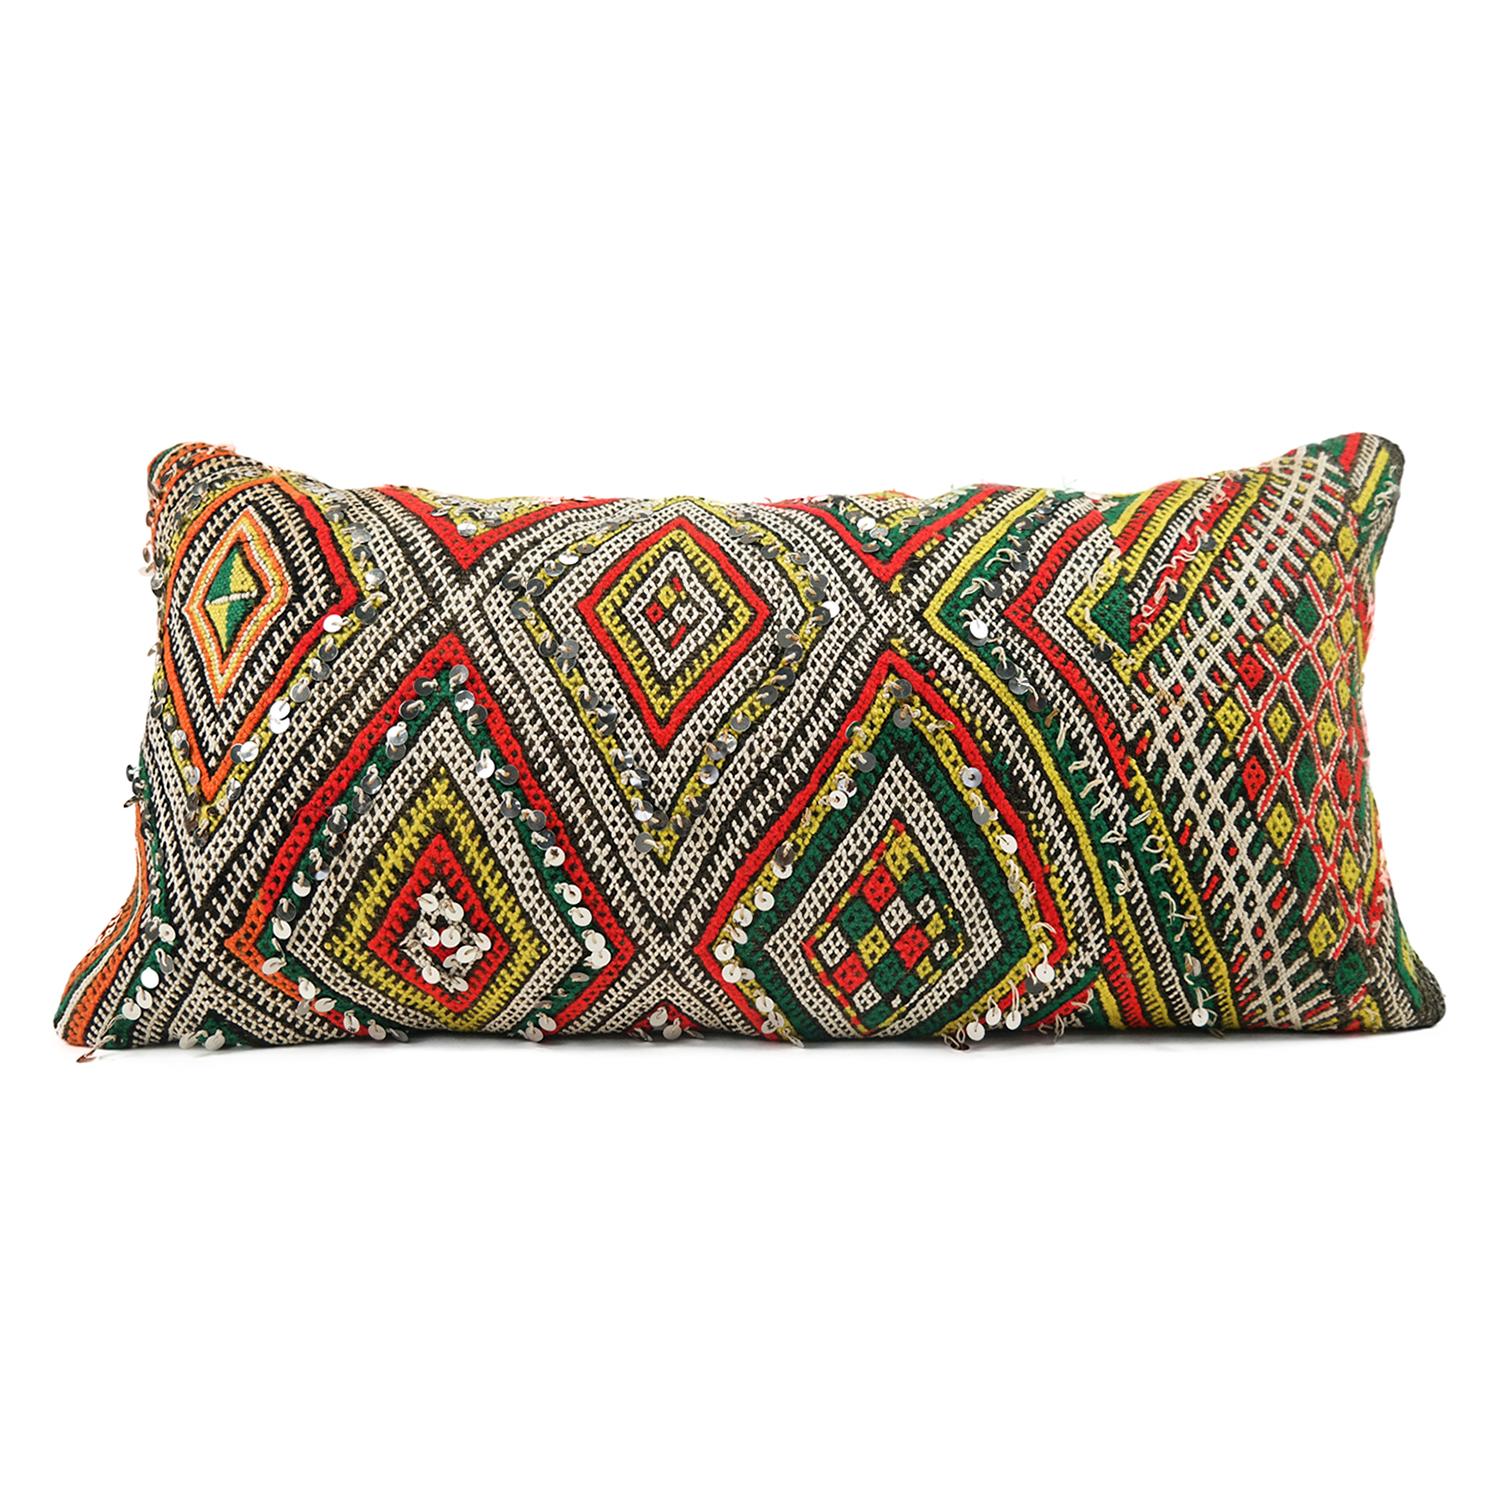 A stunning extra large bohemian Moroccan Kilim cushion custom made in Morocco. Cut from a circa 40 years old hand loomed Kilim rug, from the Middle Atlas Mountains. We have searched and selected the rug ourselves. The pillow has beautiful colors